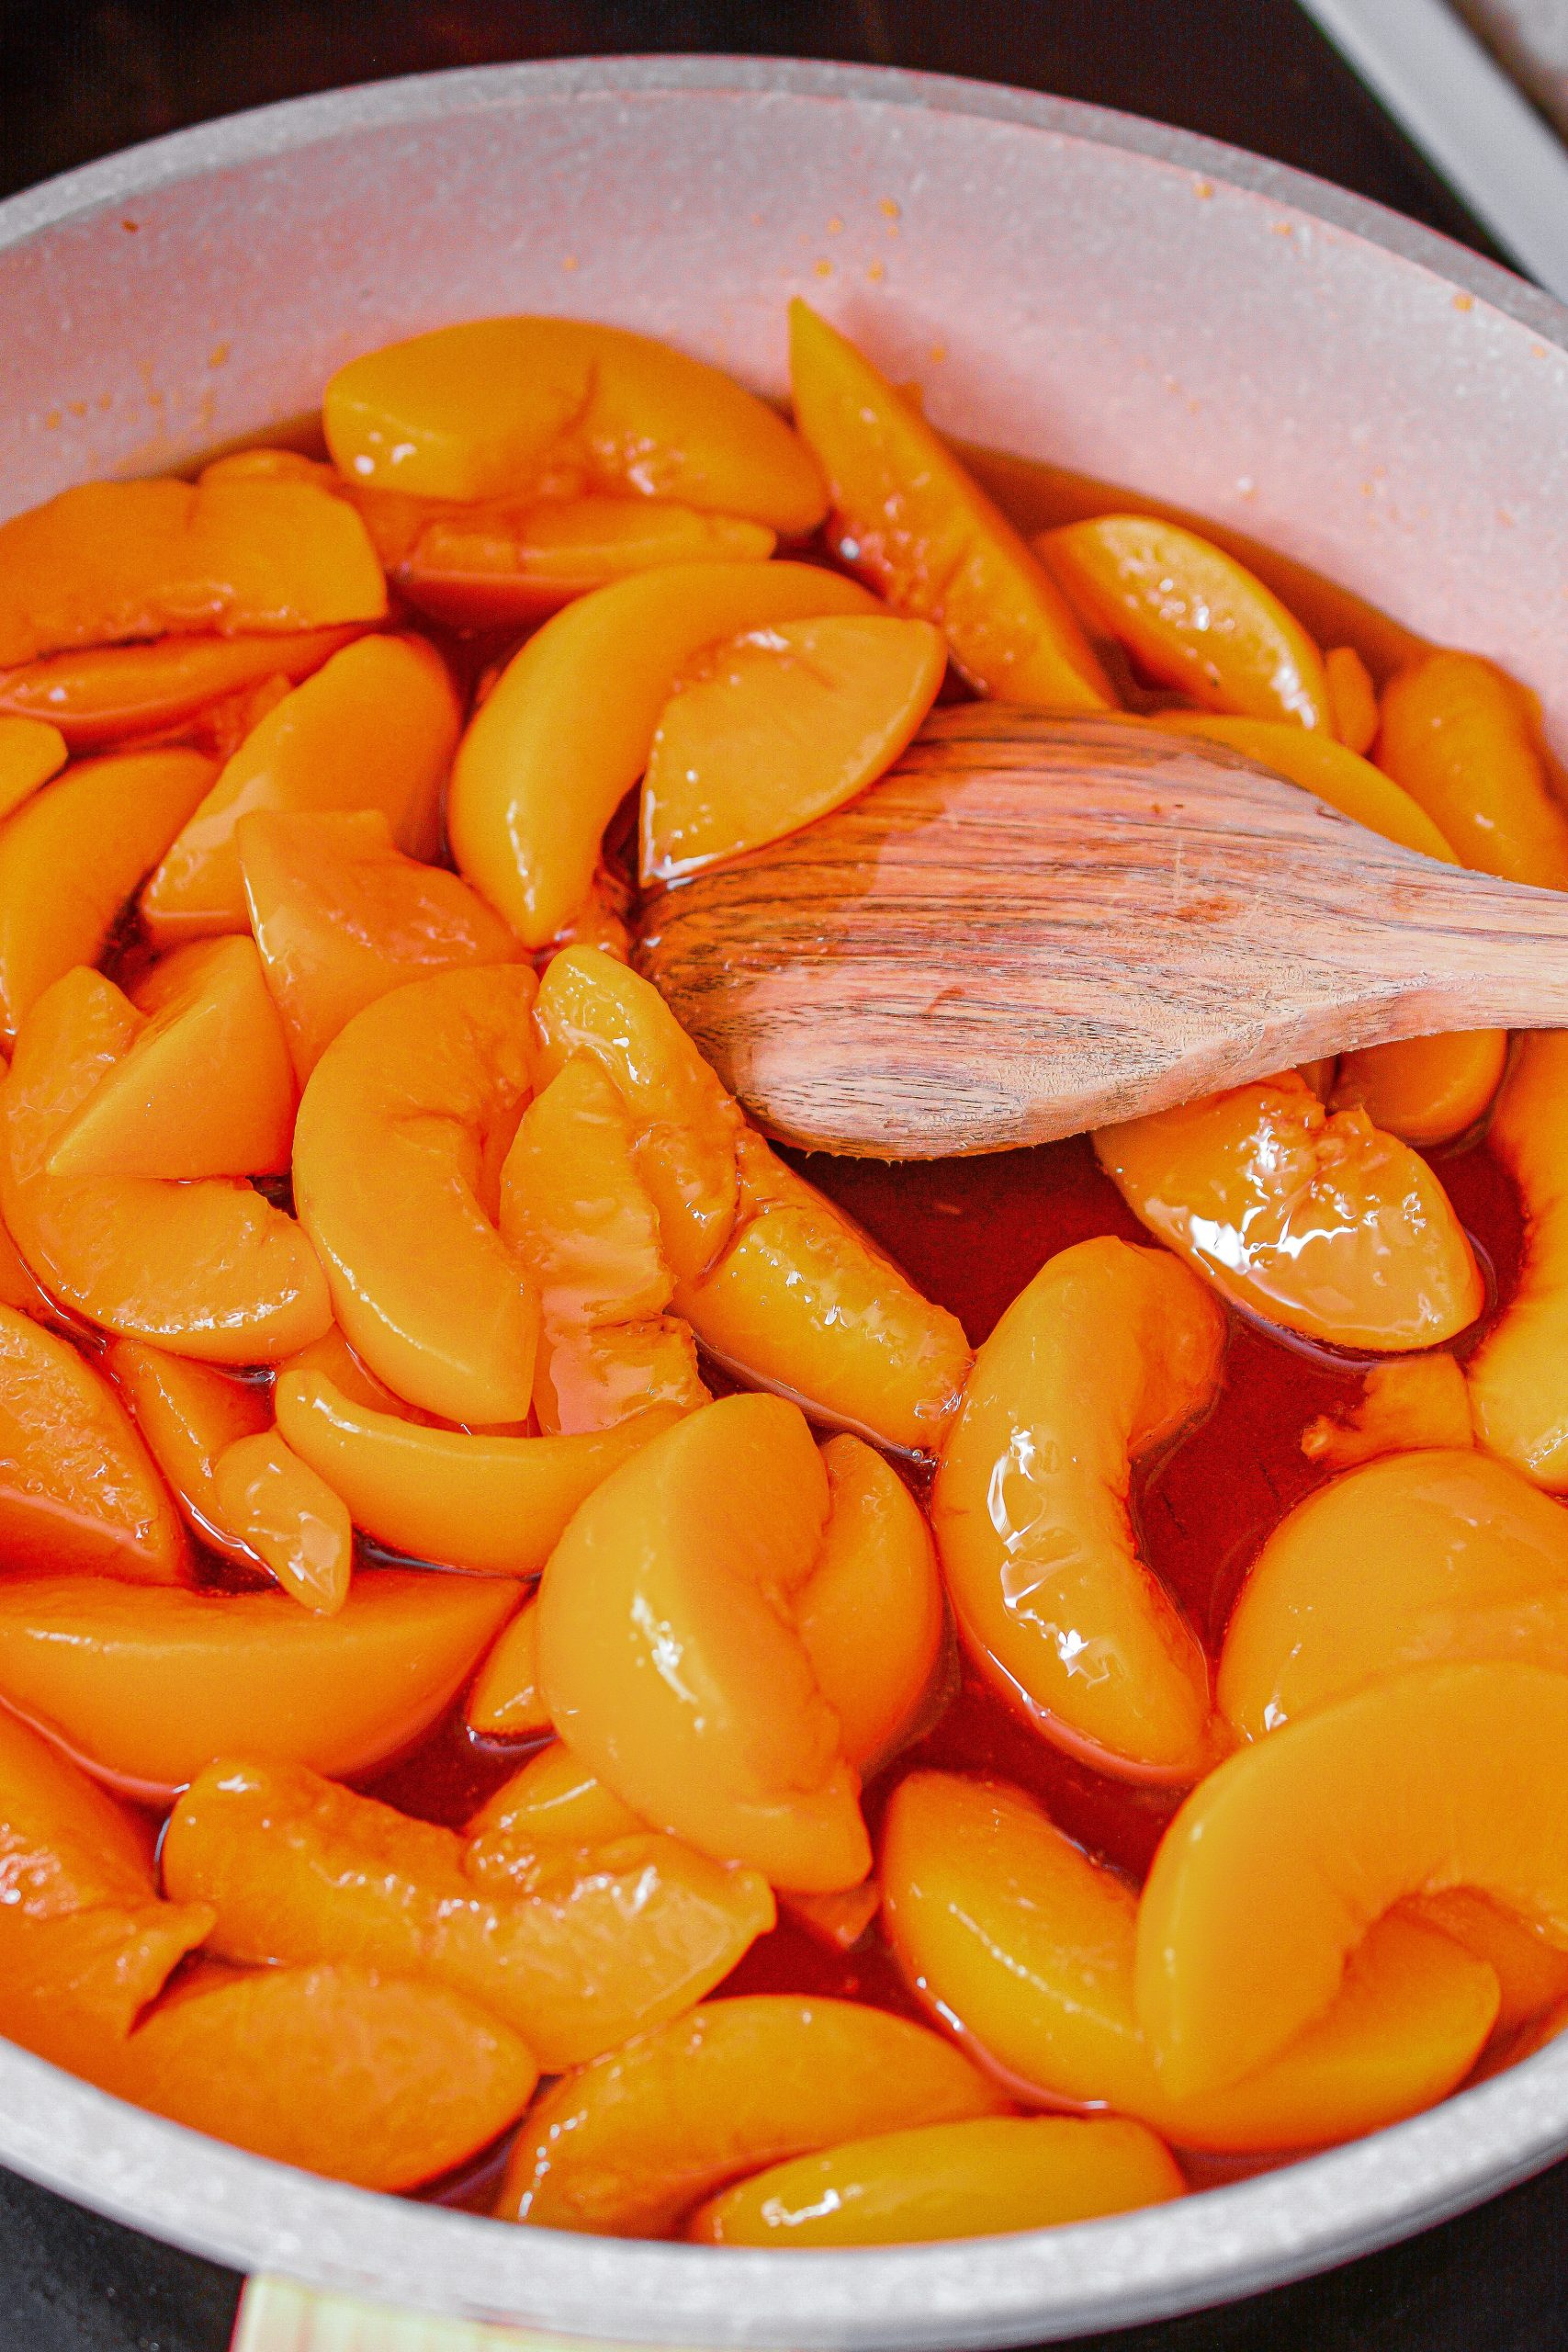 Place the peaches in a skillet over medium heat on the stove.